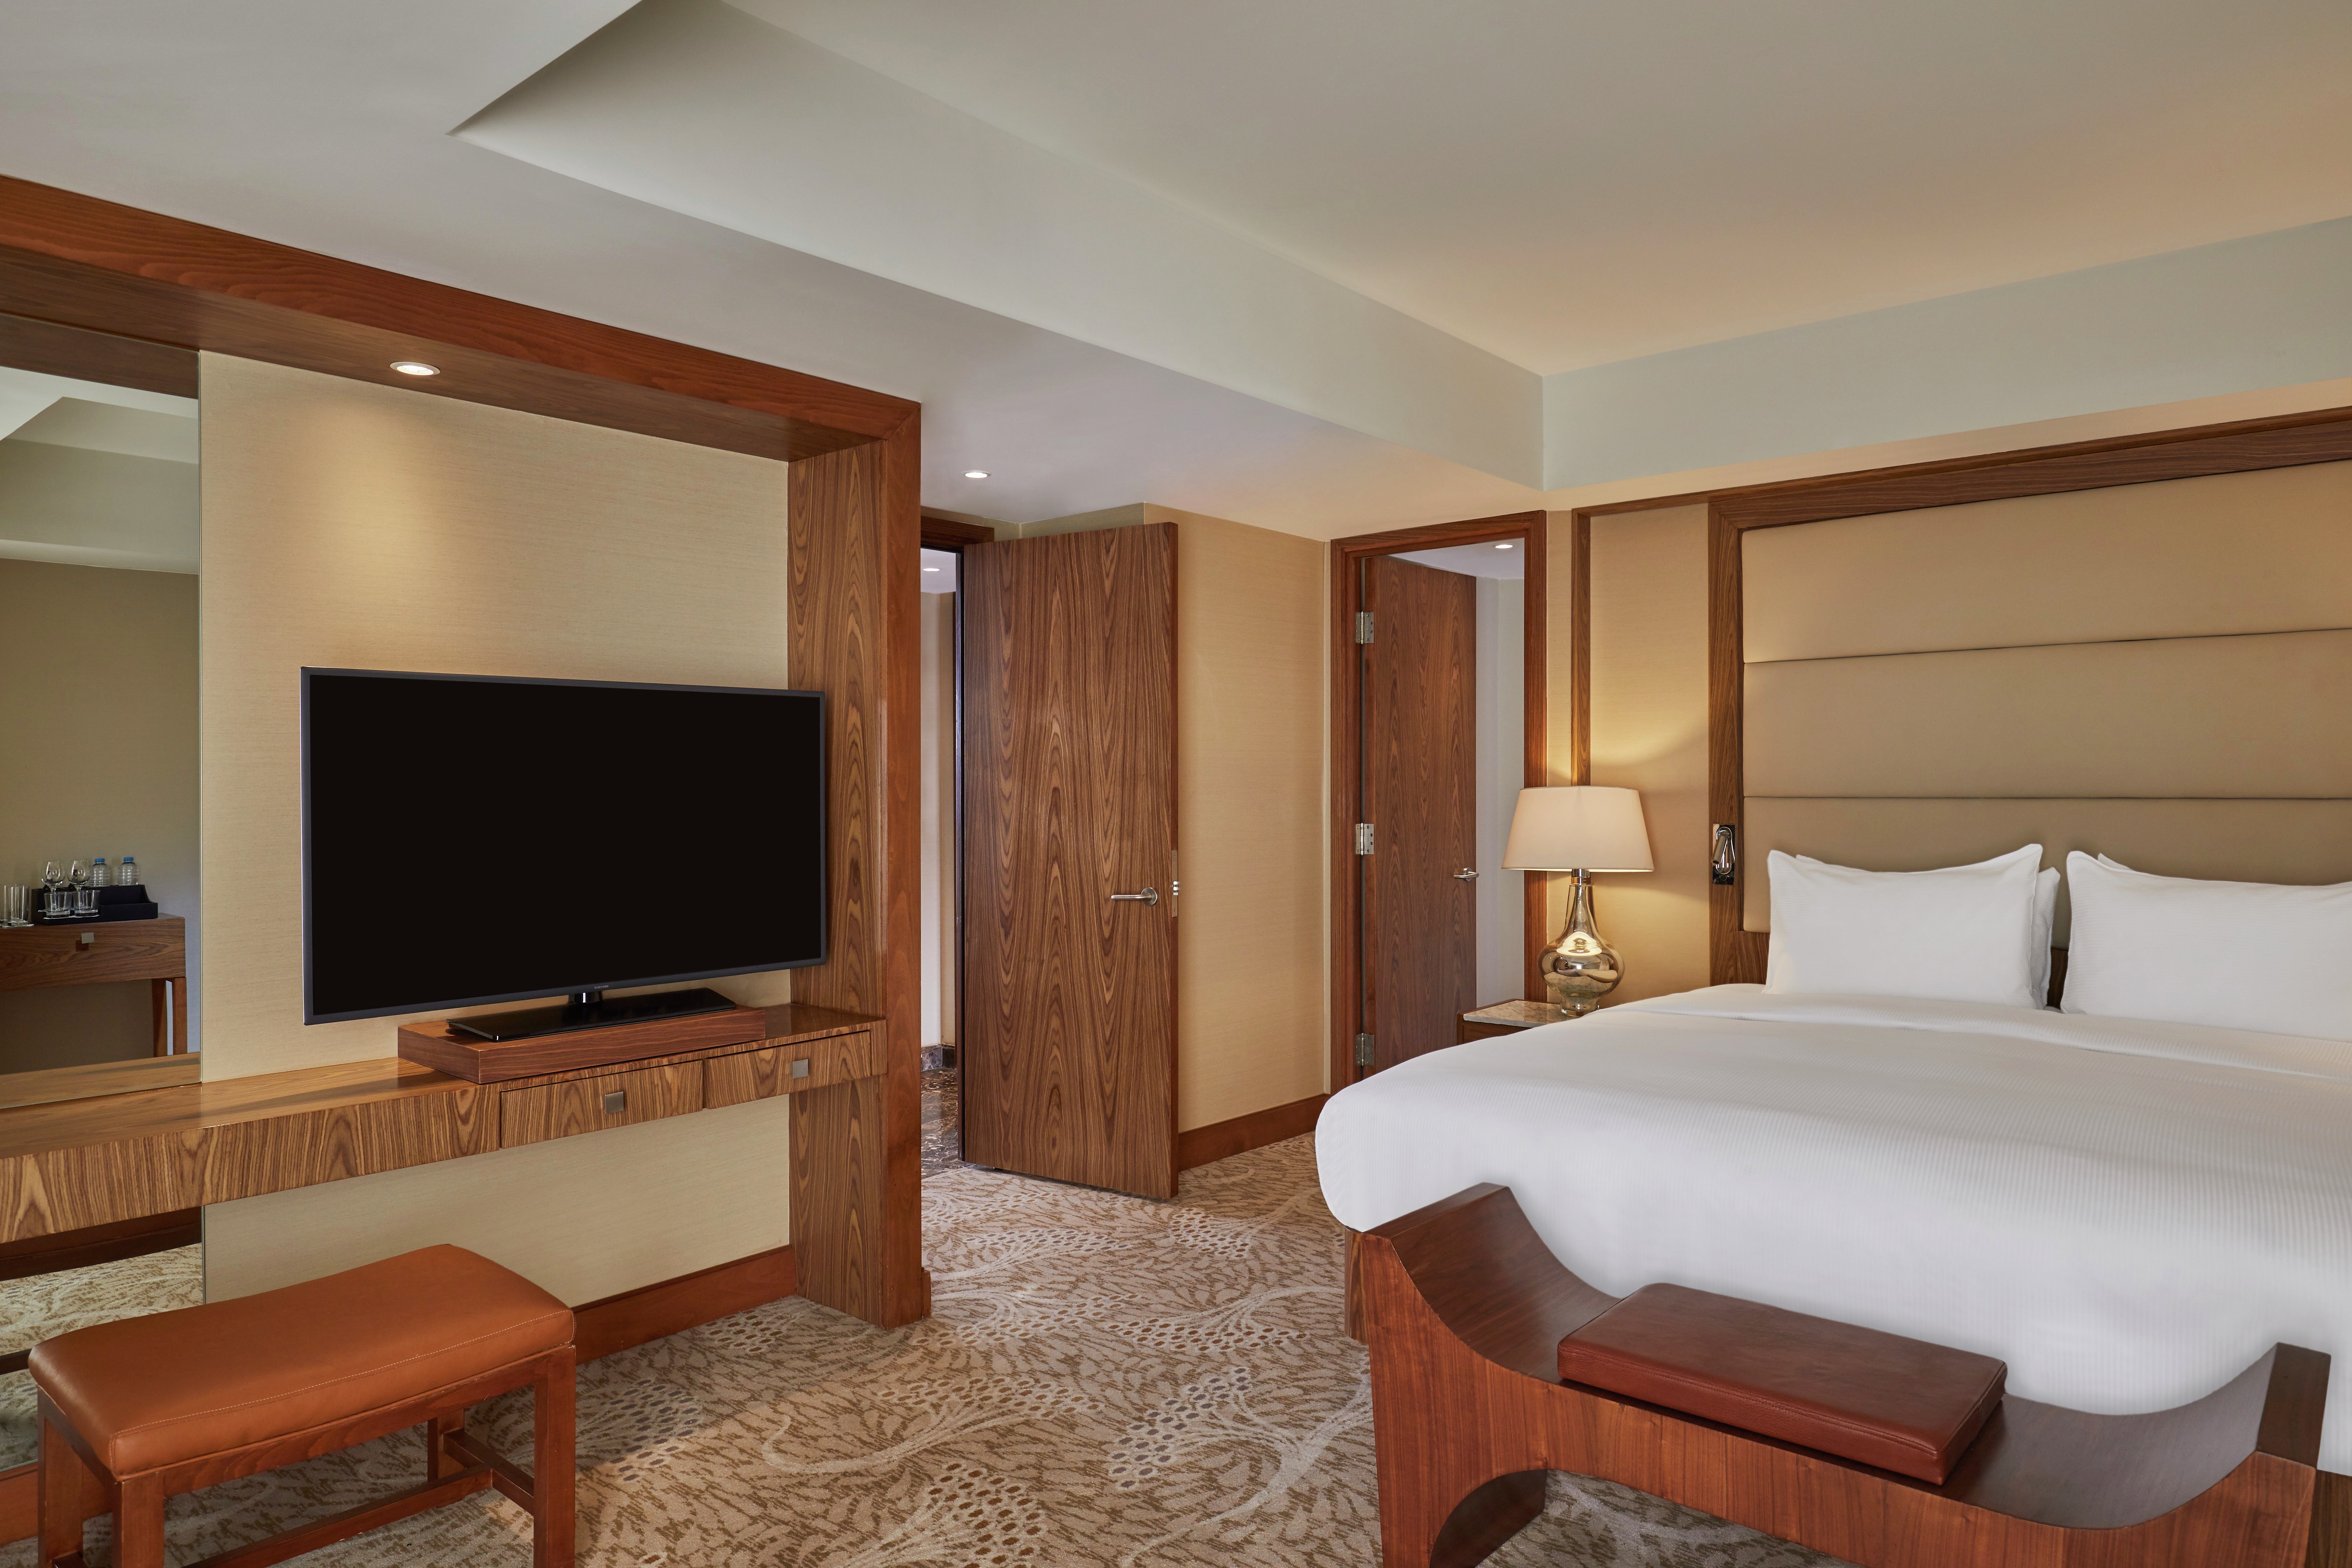 Imperial Suite Bedroom with Room Technology and Mirror